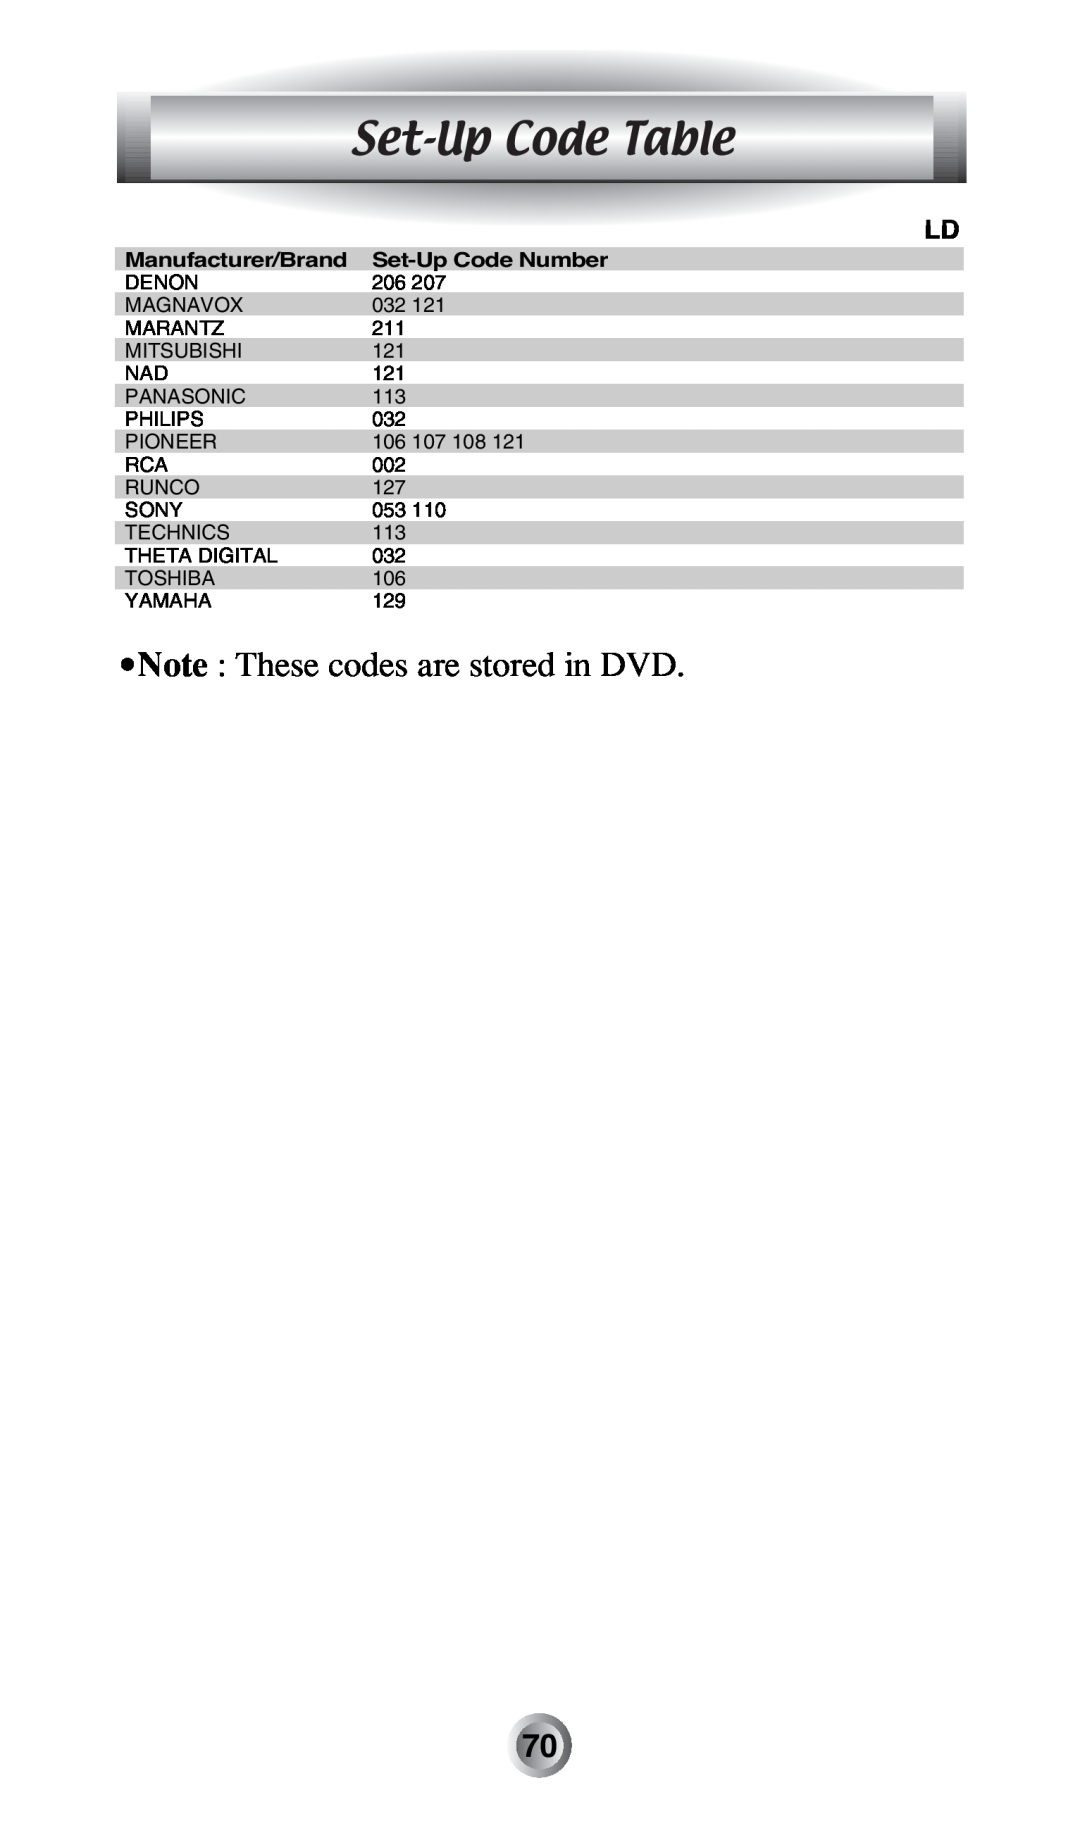 Radio Shack MX-500TM manual Set-Up Code Table, Note These codes are stored in DVD, Manufacturer/Brand, Set-Up Code Number 